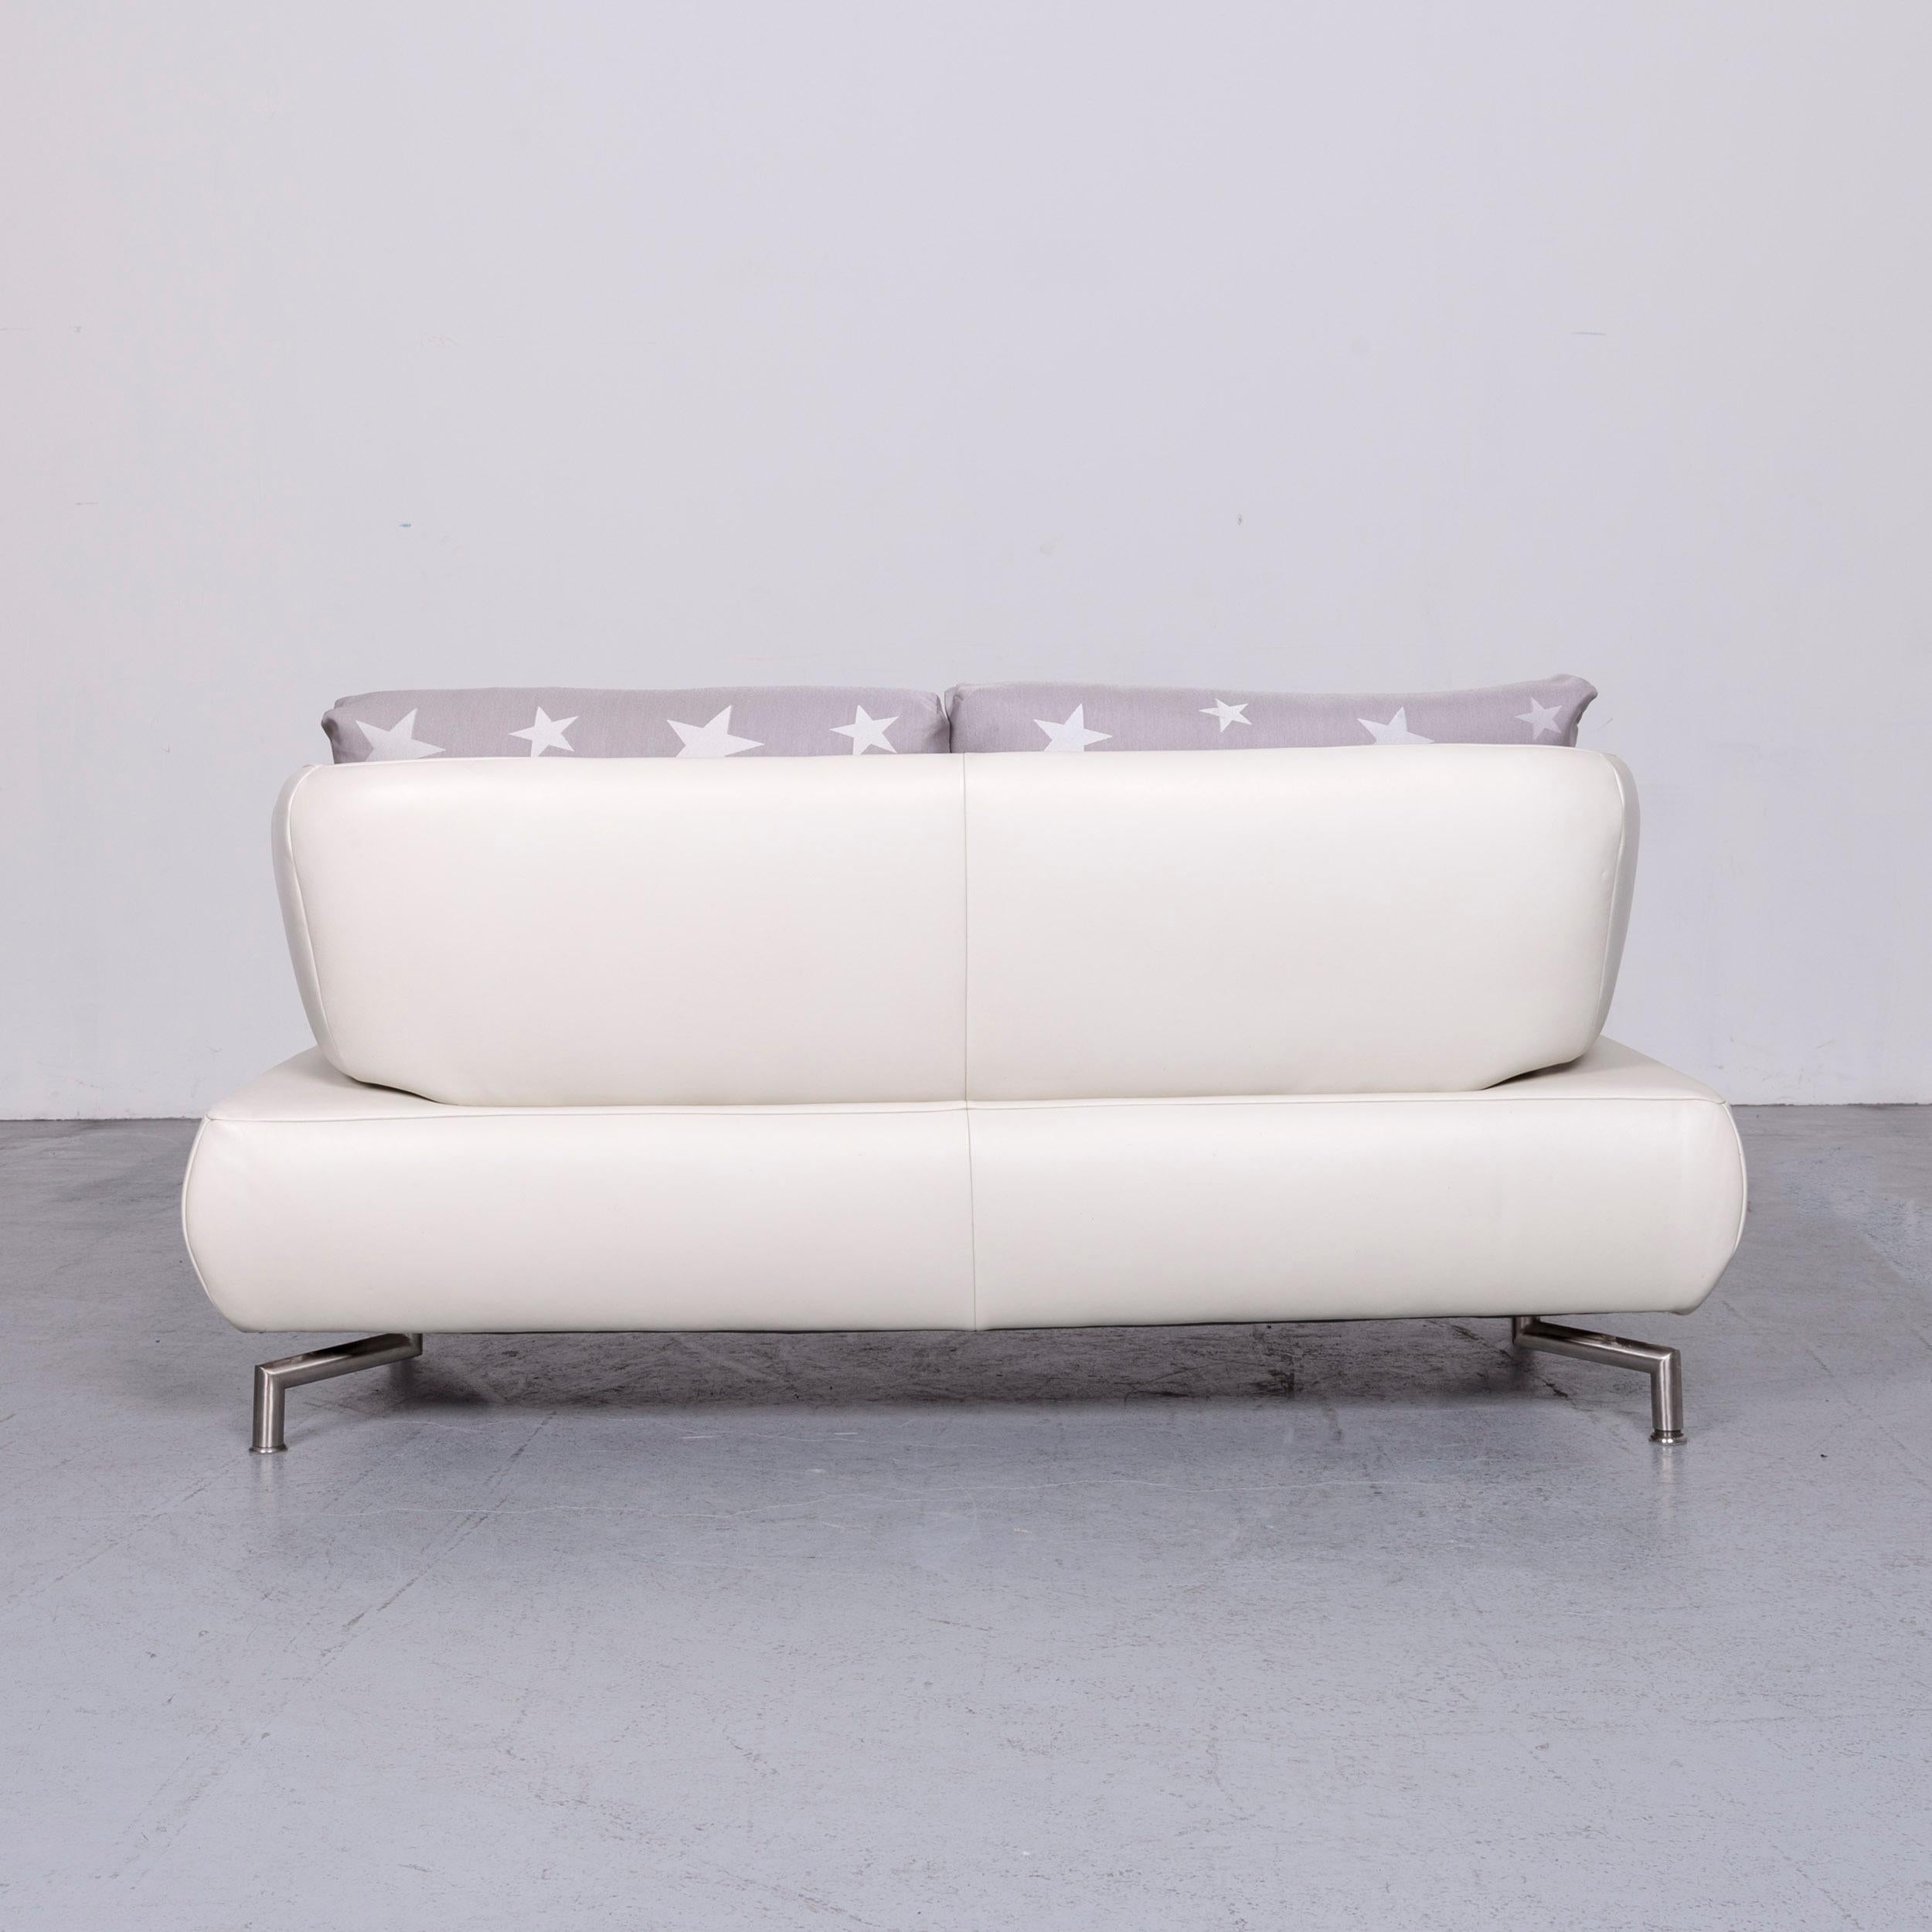 Koinor Designer Two-Seat Sofa White Leather Couch with Pillow 5